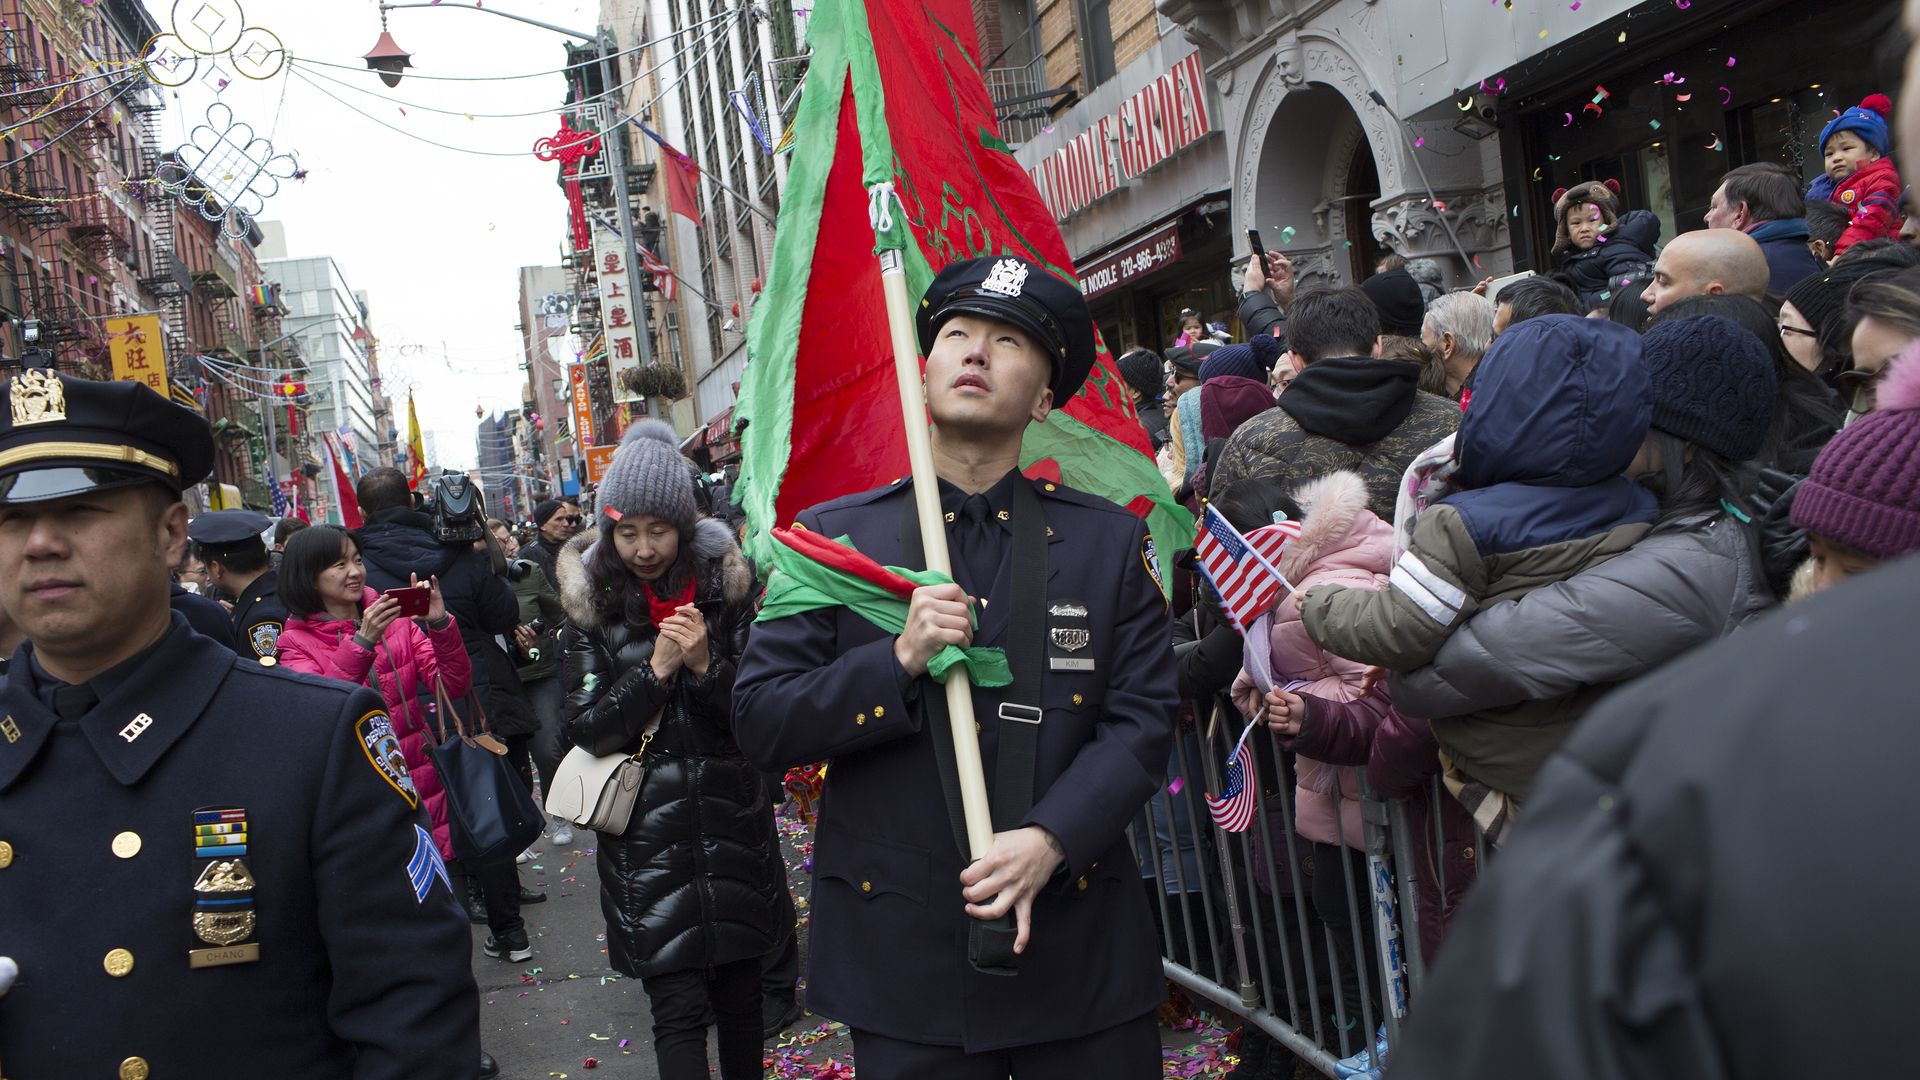 An Asian American police officer walks through New York's Chinese American community during an annual parade on February 17, 2019.